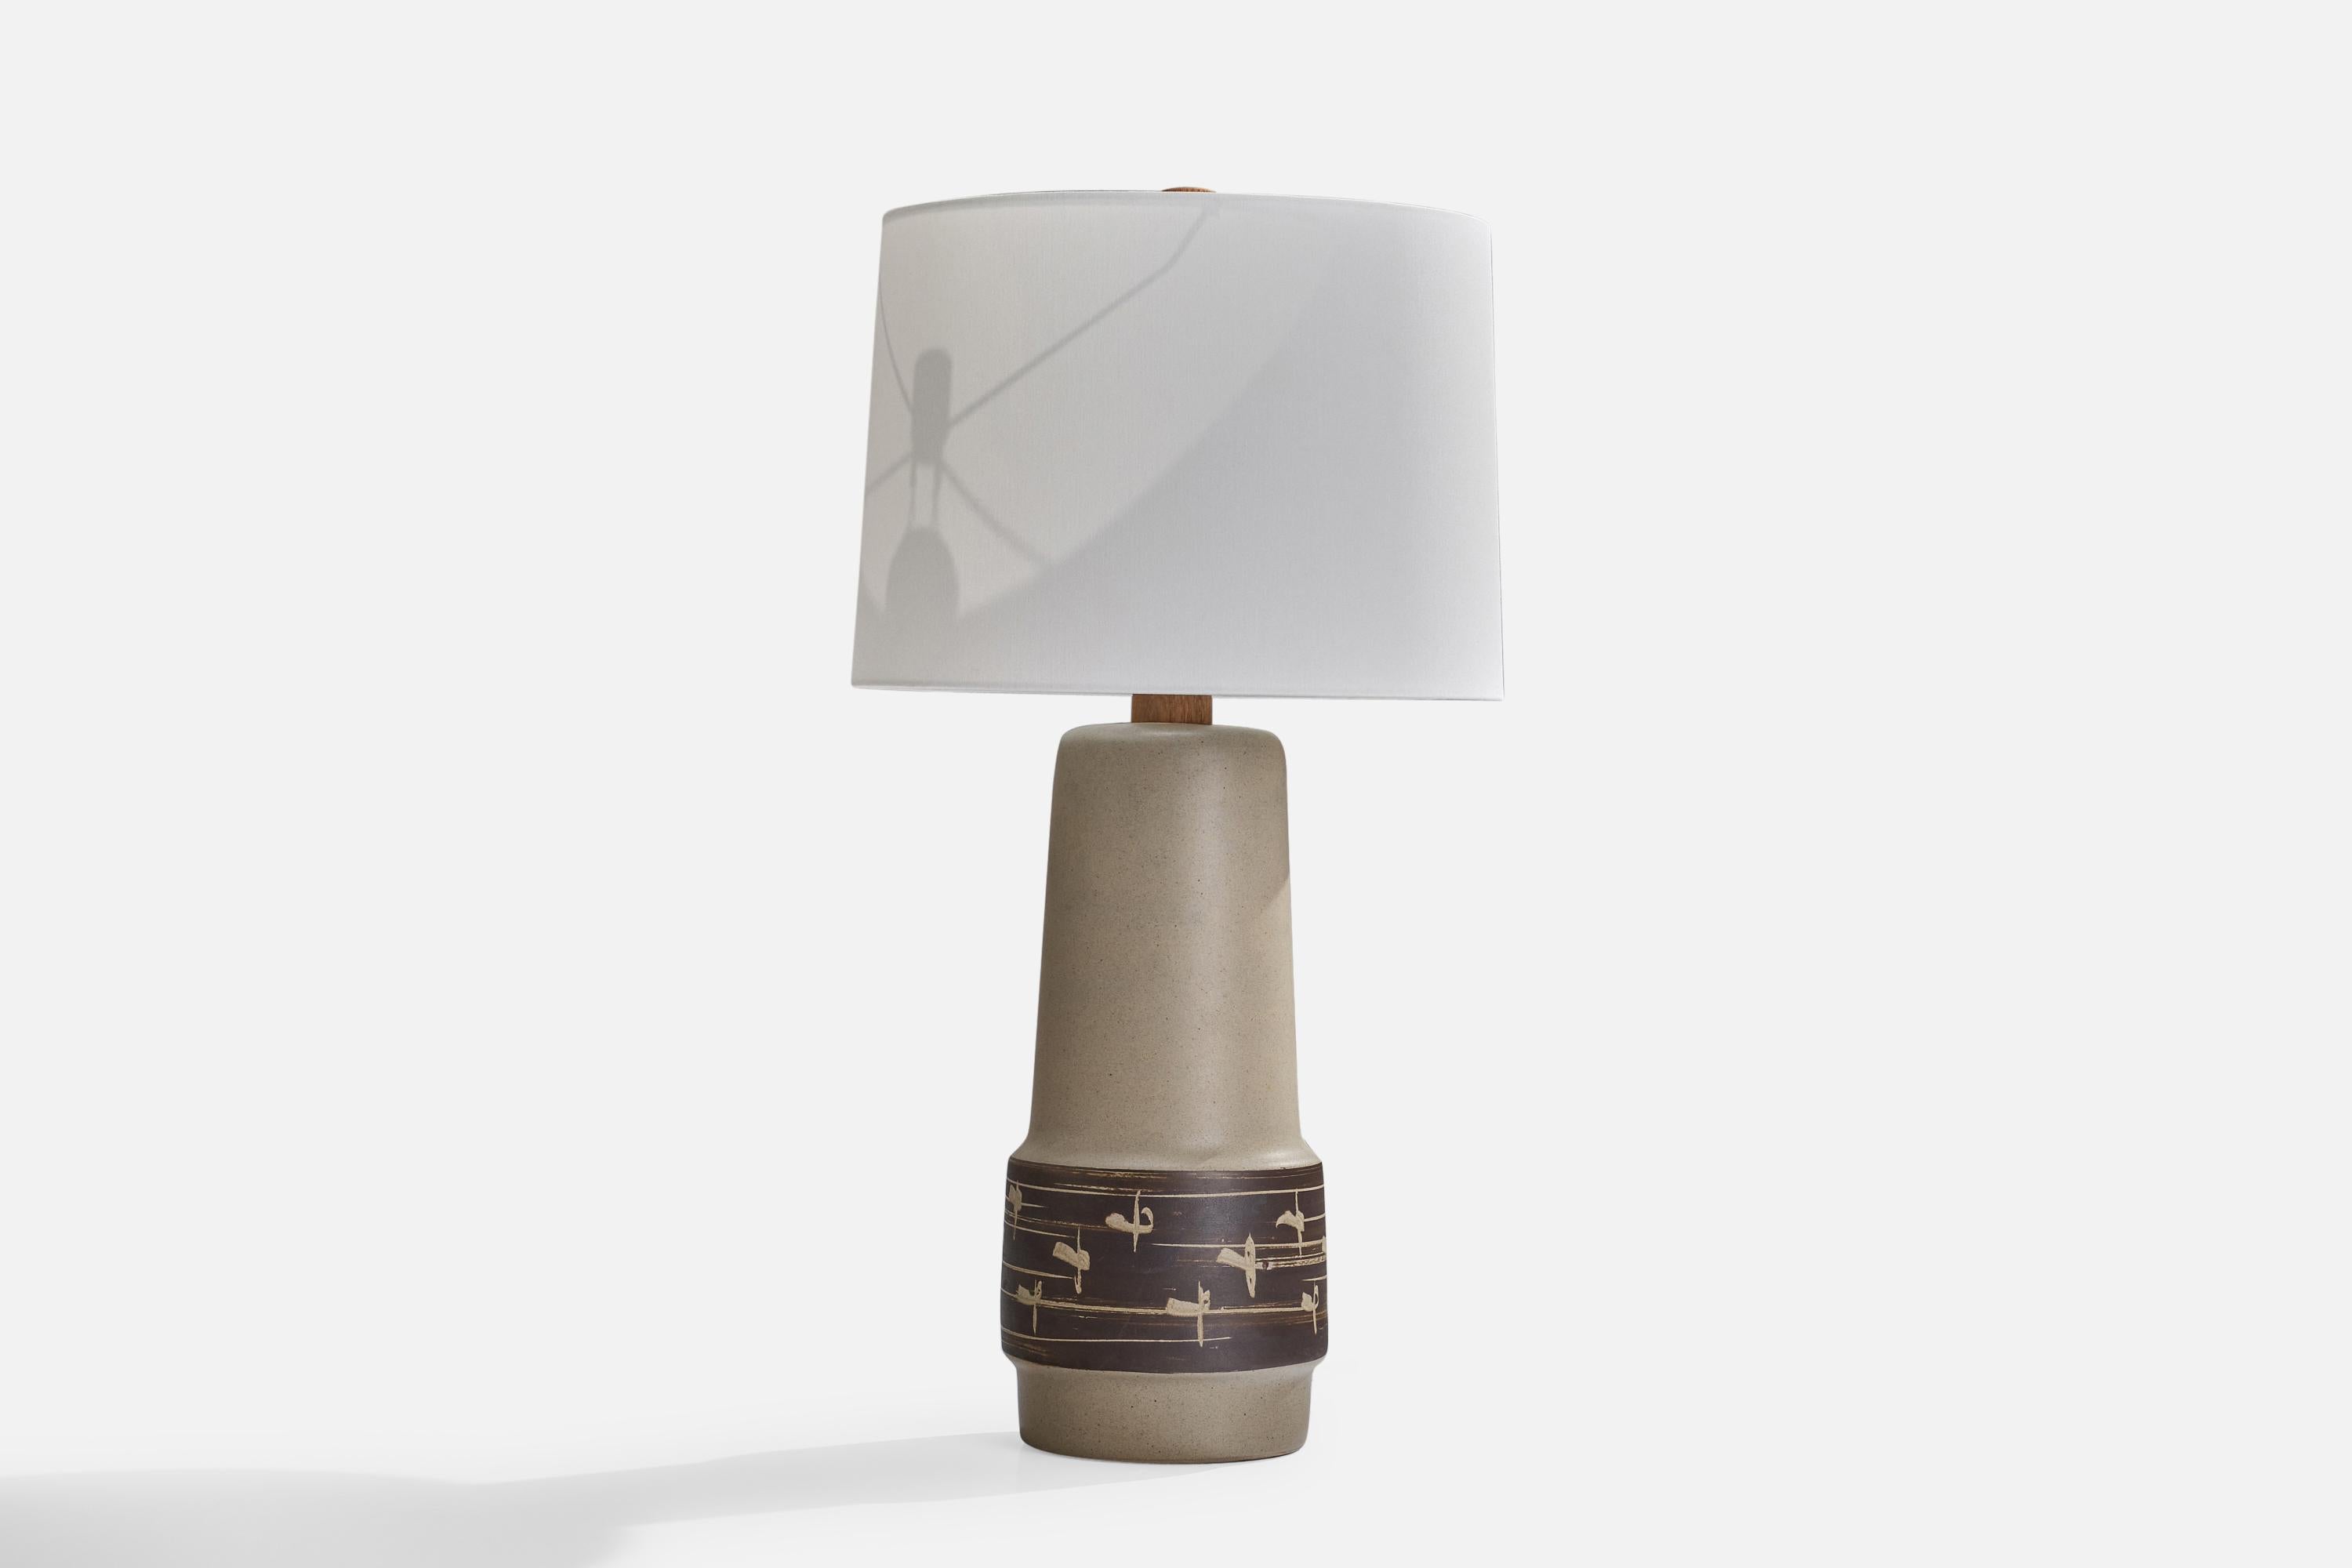 A grey-glazed and brown ceramic and walnut table lamp designed by Jane & Gordon Martz and produced by Marshall Studios, USA, 1960s.

Dimensions of Lamp (inches): 20.48”  H x 7.68”  Diameter
Dimensions of Shade (inches): 13” Top Diameter x 13.75”